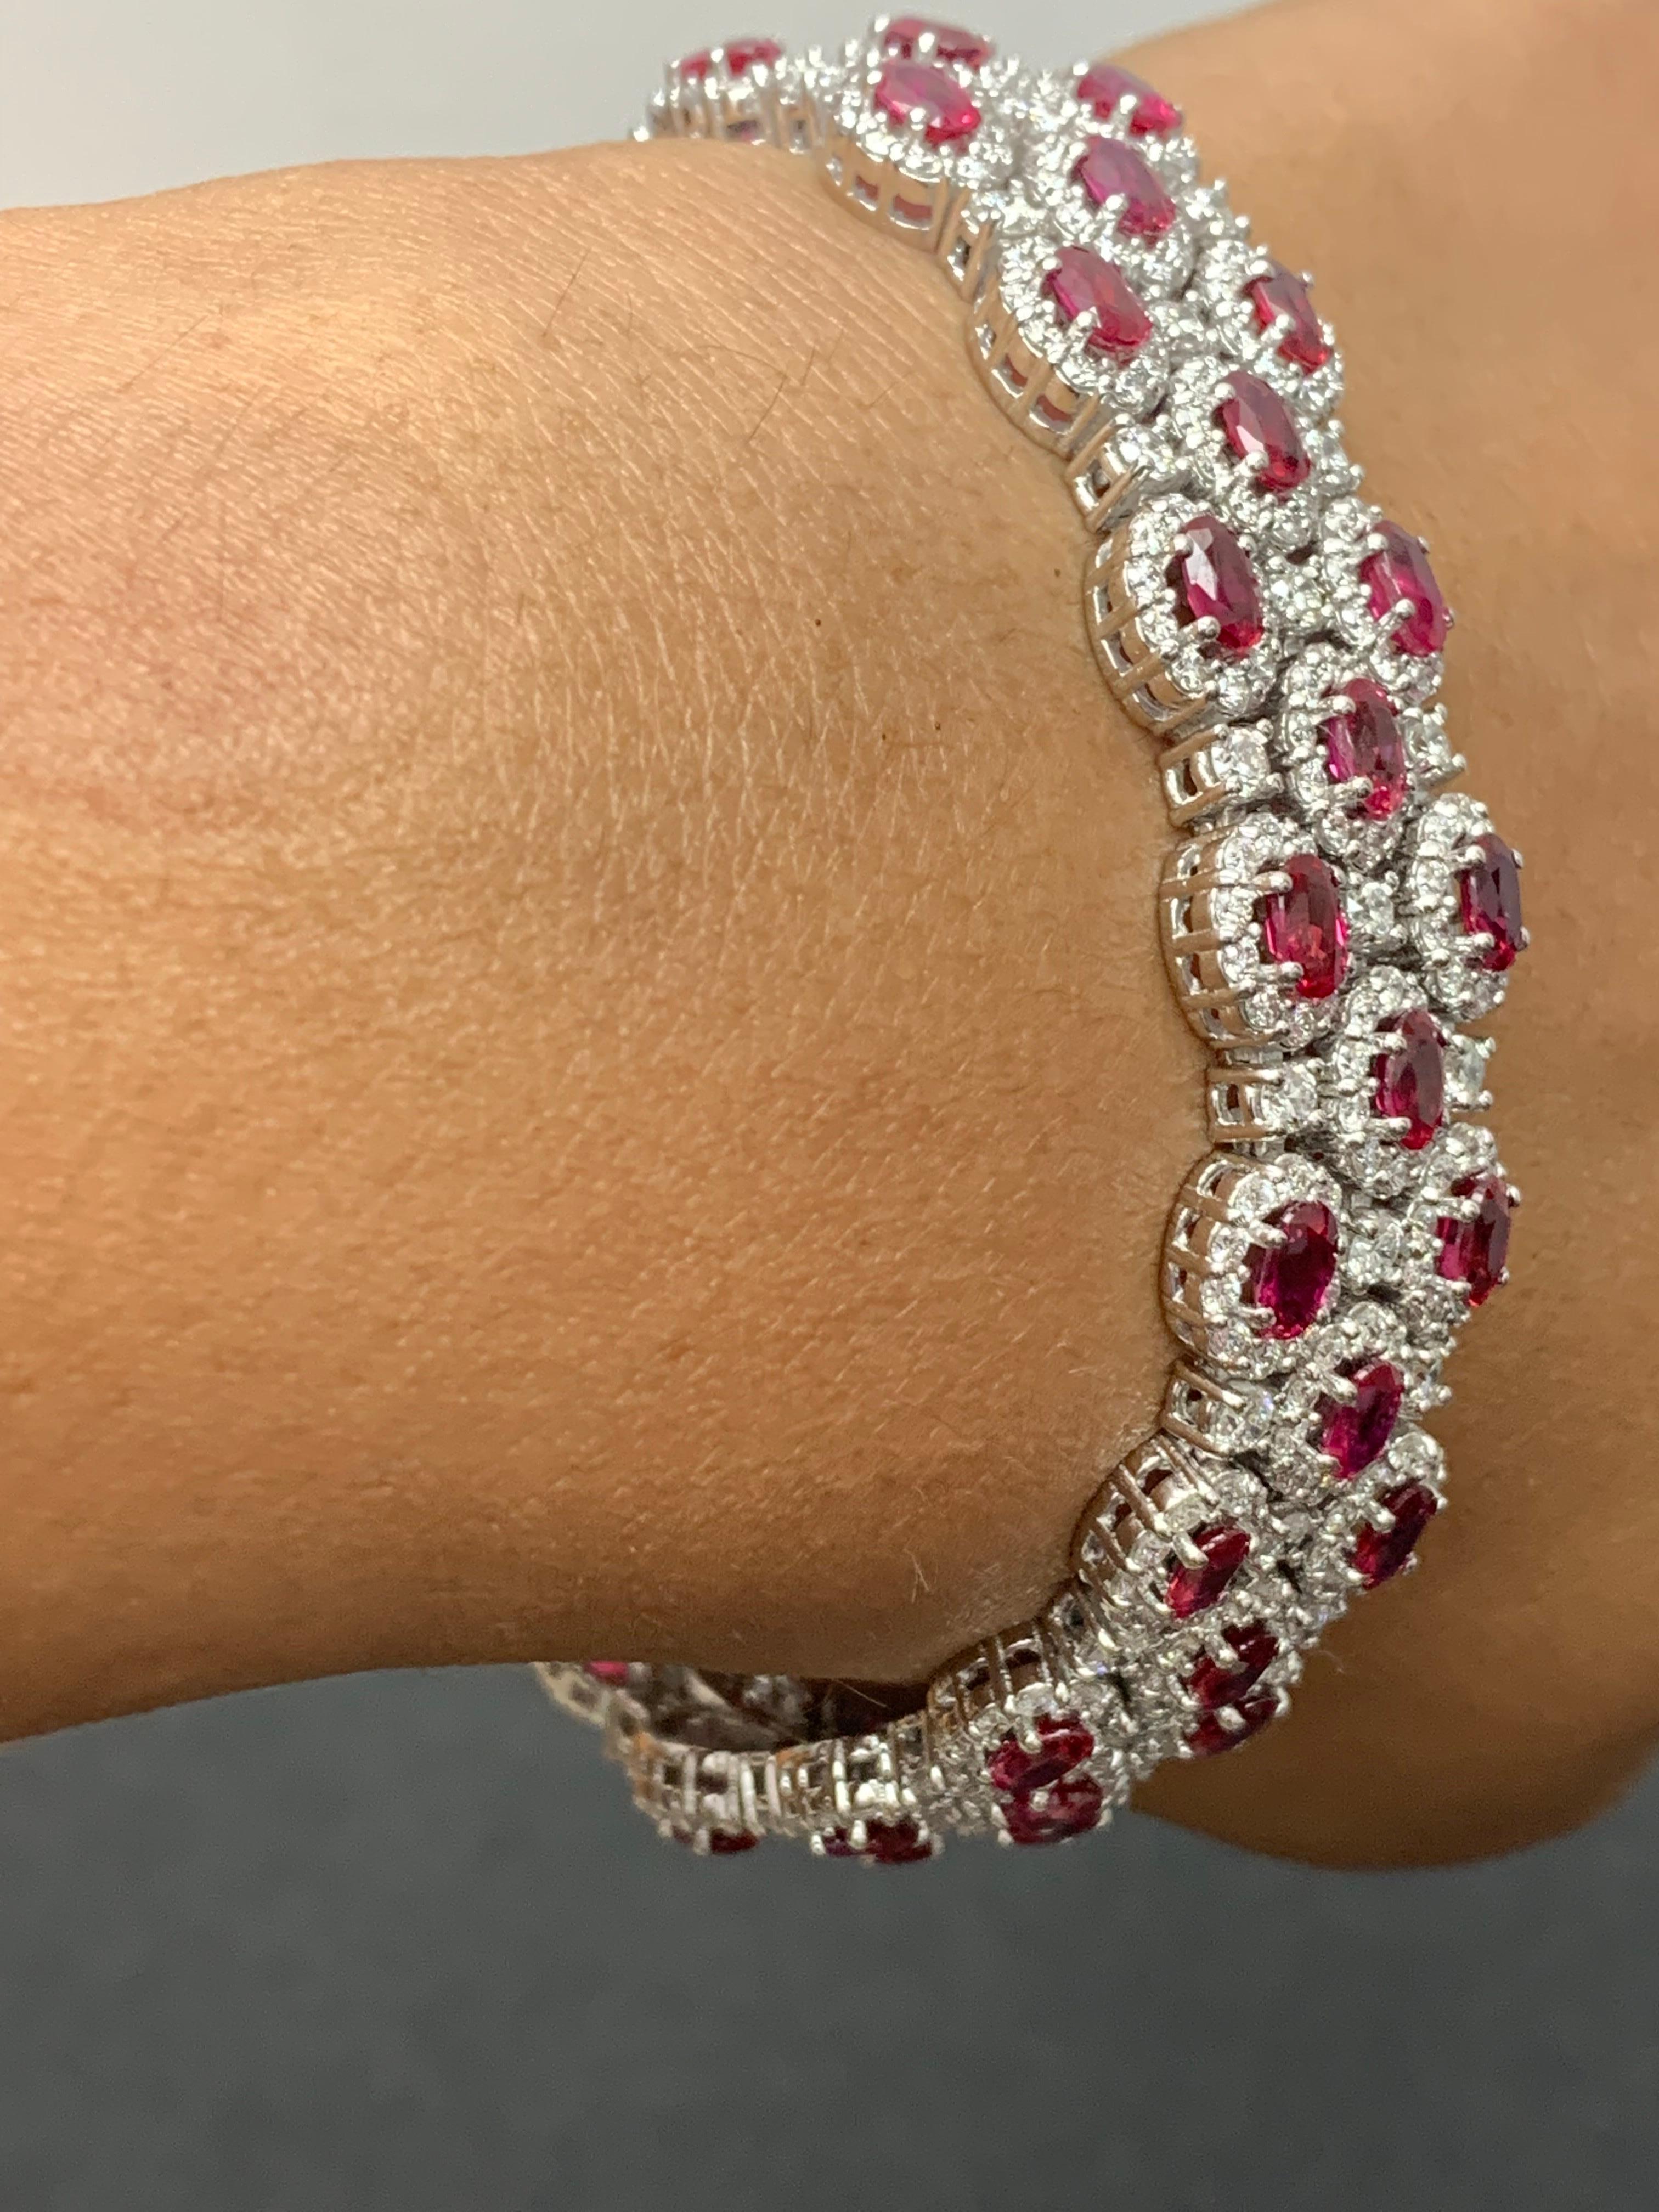 Women's 14.91 Carat Oval Cut Ruby and Diamond 3 Row Bracelet in 14K White Gold For Sale